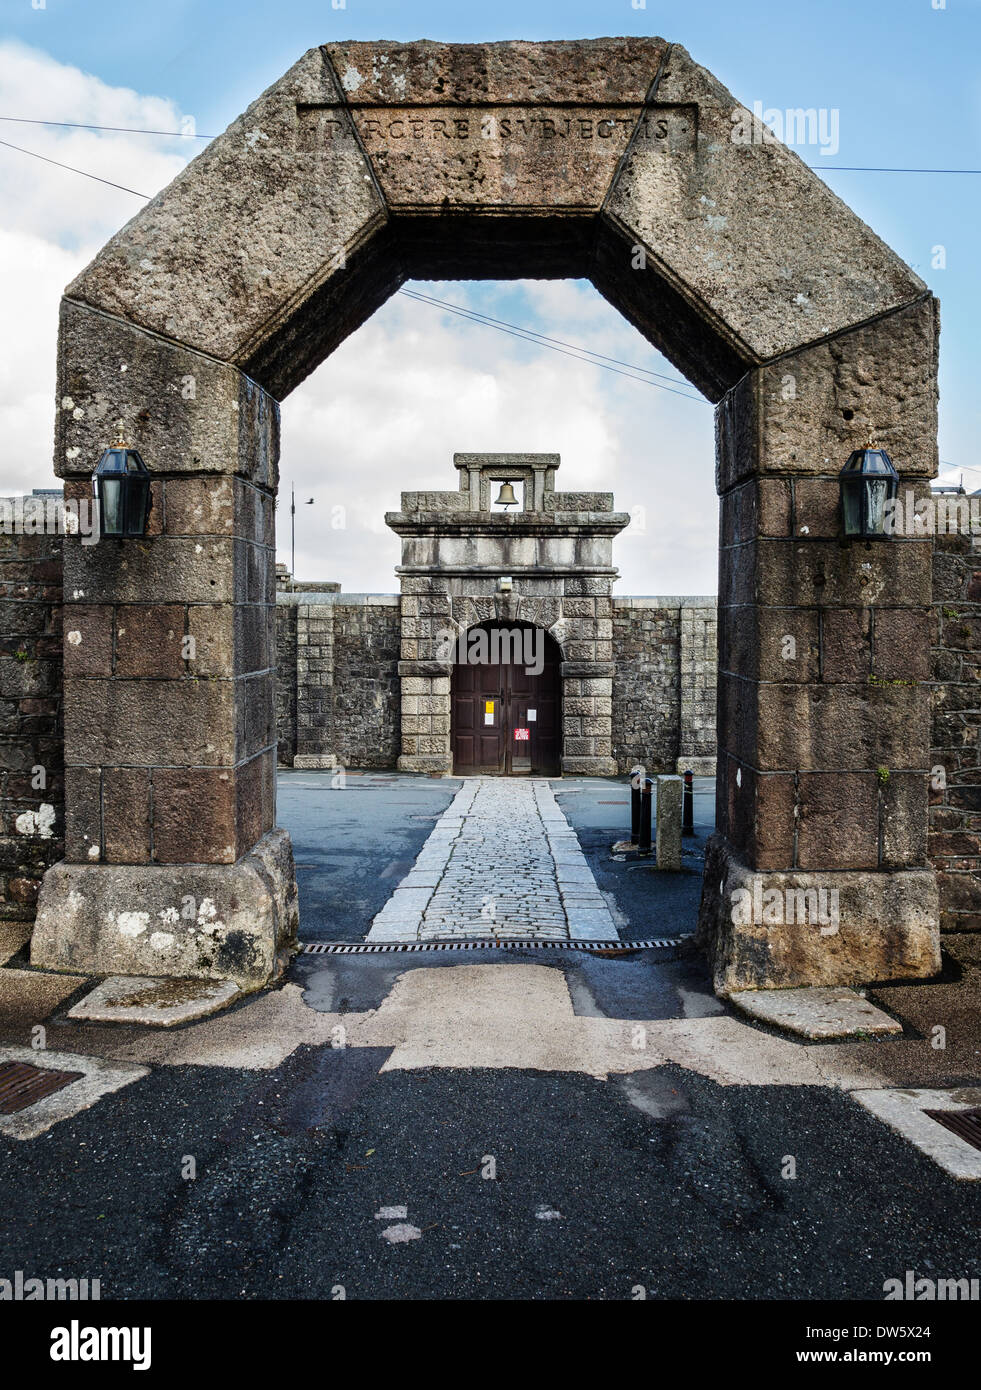 Arched entrance to Her Majesty's Prison Dartmoor  built from granite blocks for functionality rather than aesthetic appearance Stock Photo